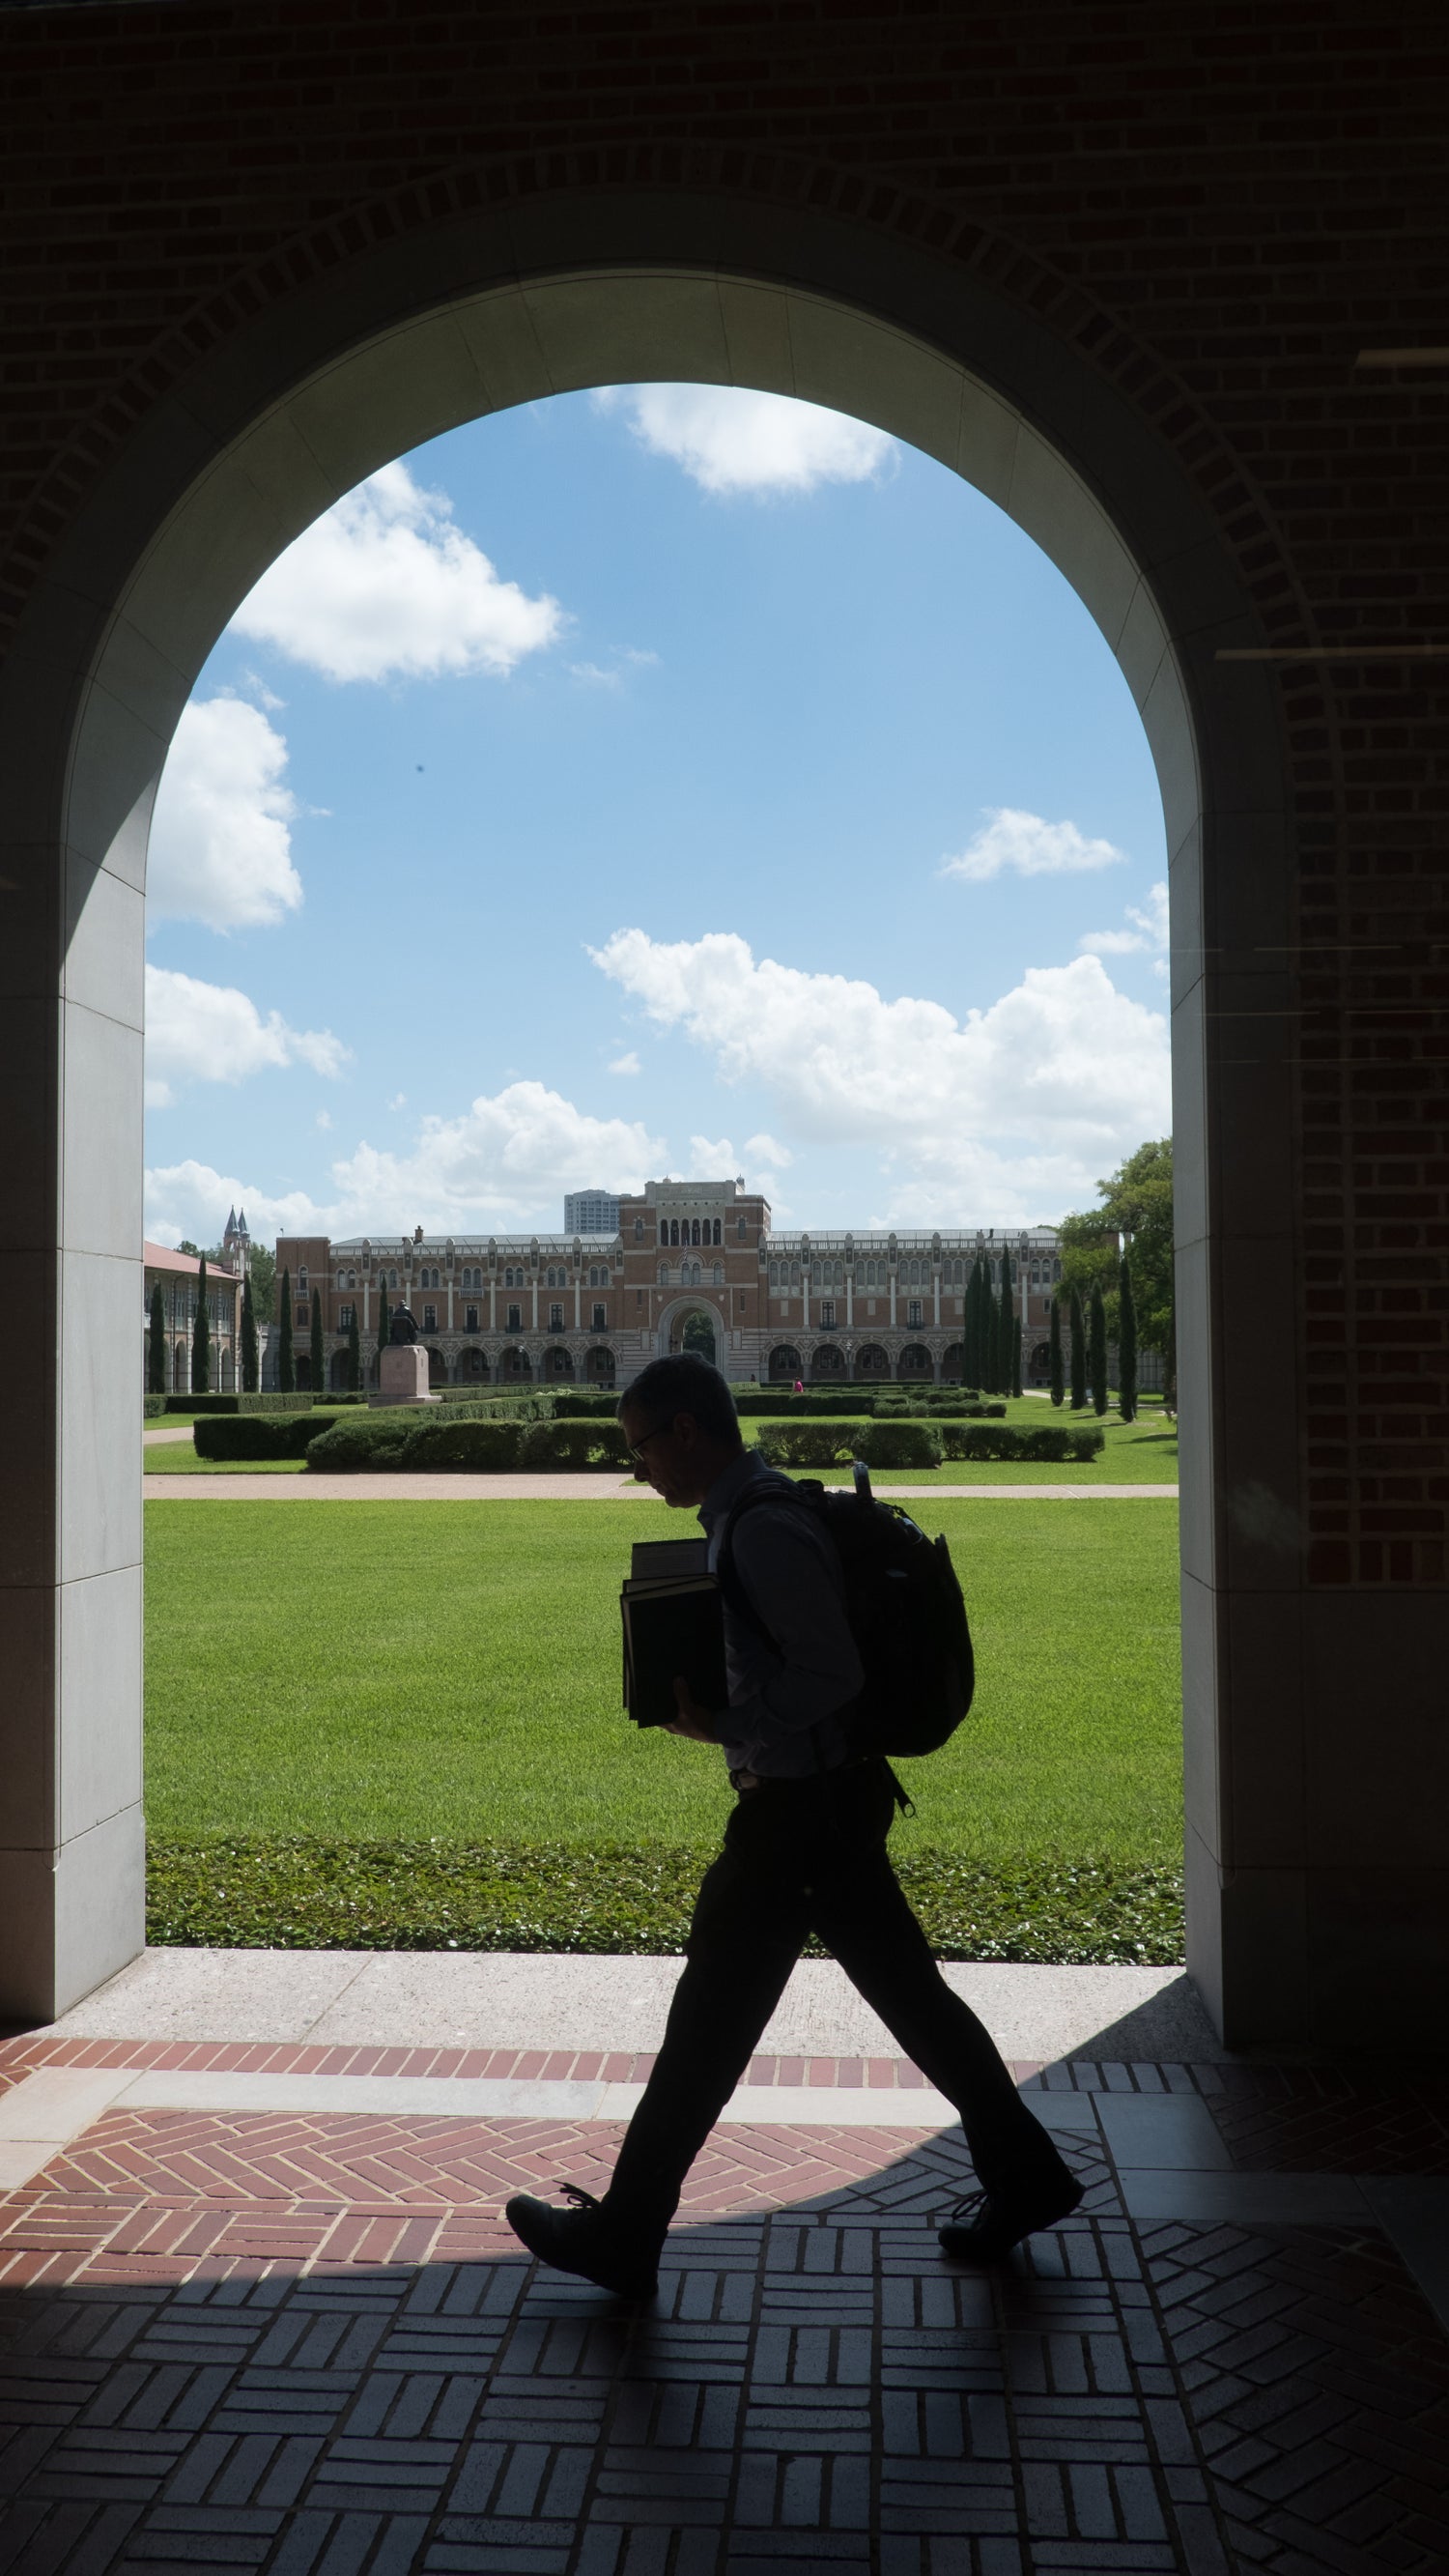 Student walking under an archway.